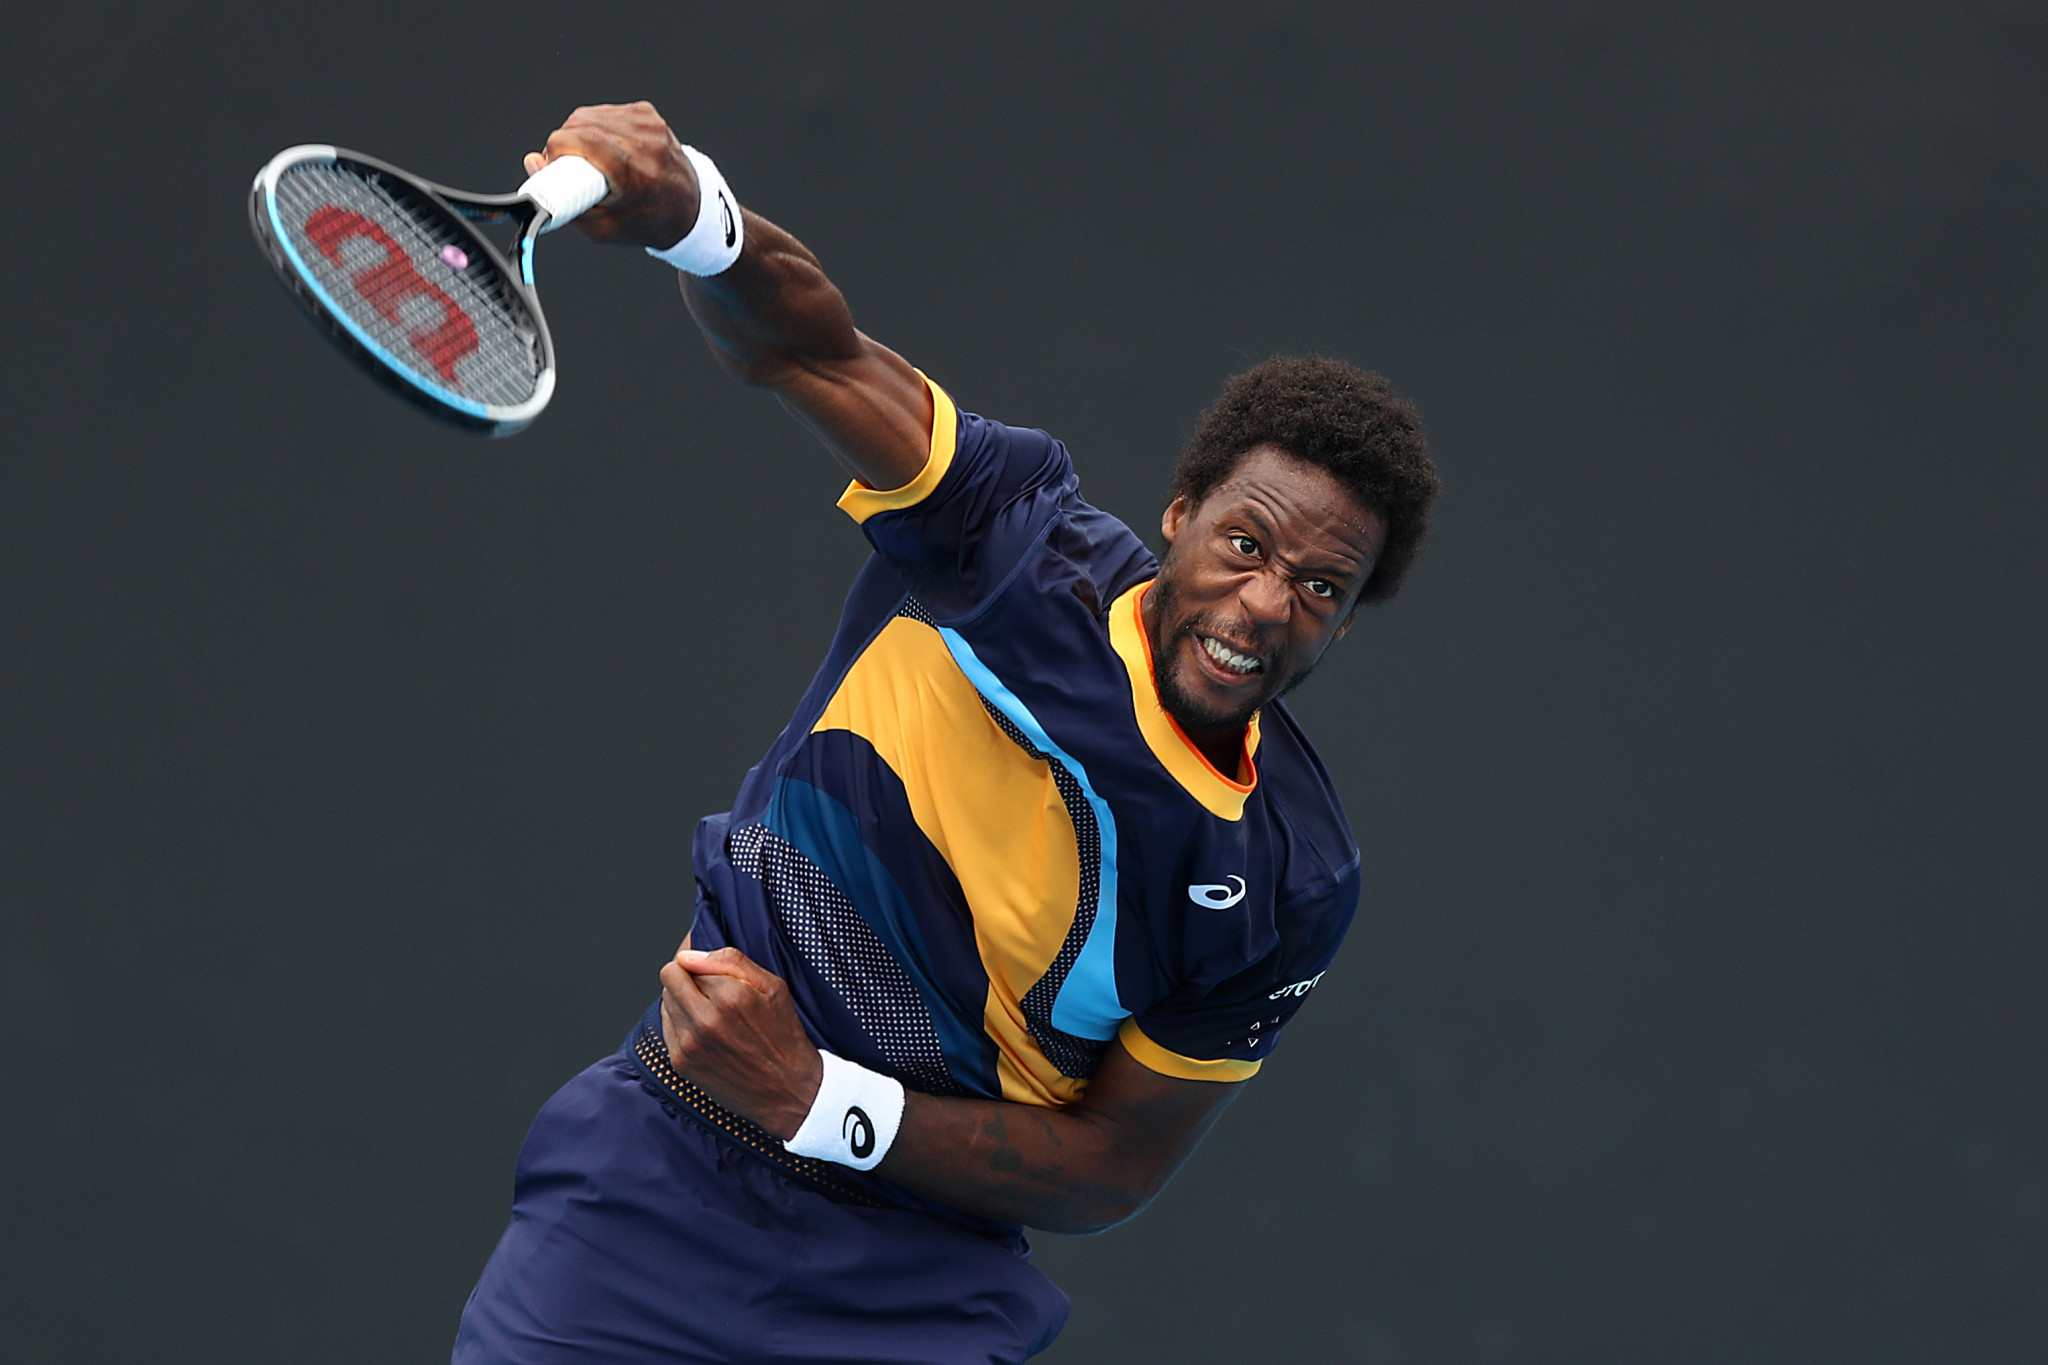 Tenth seed Gael Monfils of France was the highest profile casualty on the first day in Melbourne ©Getty Images